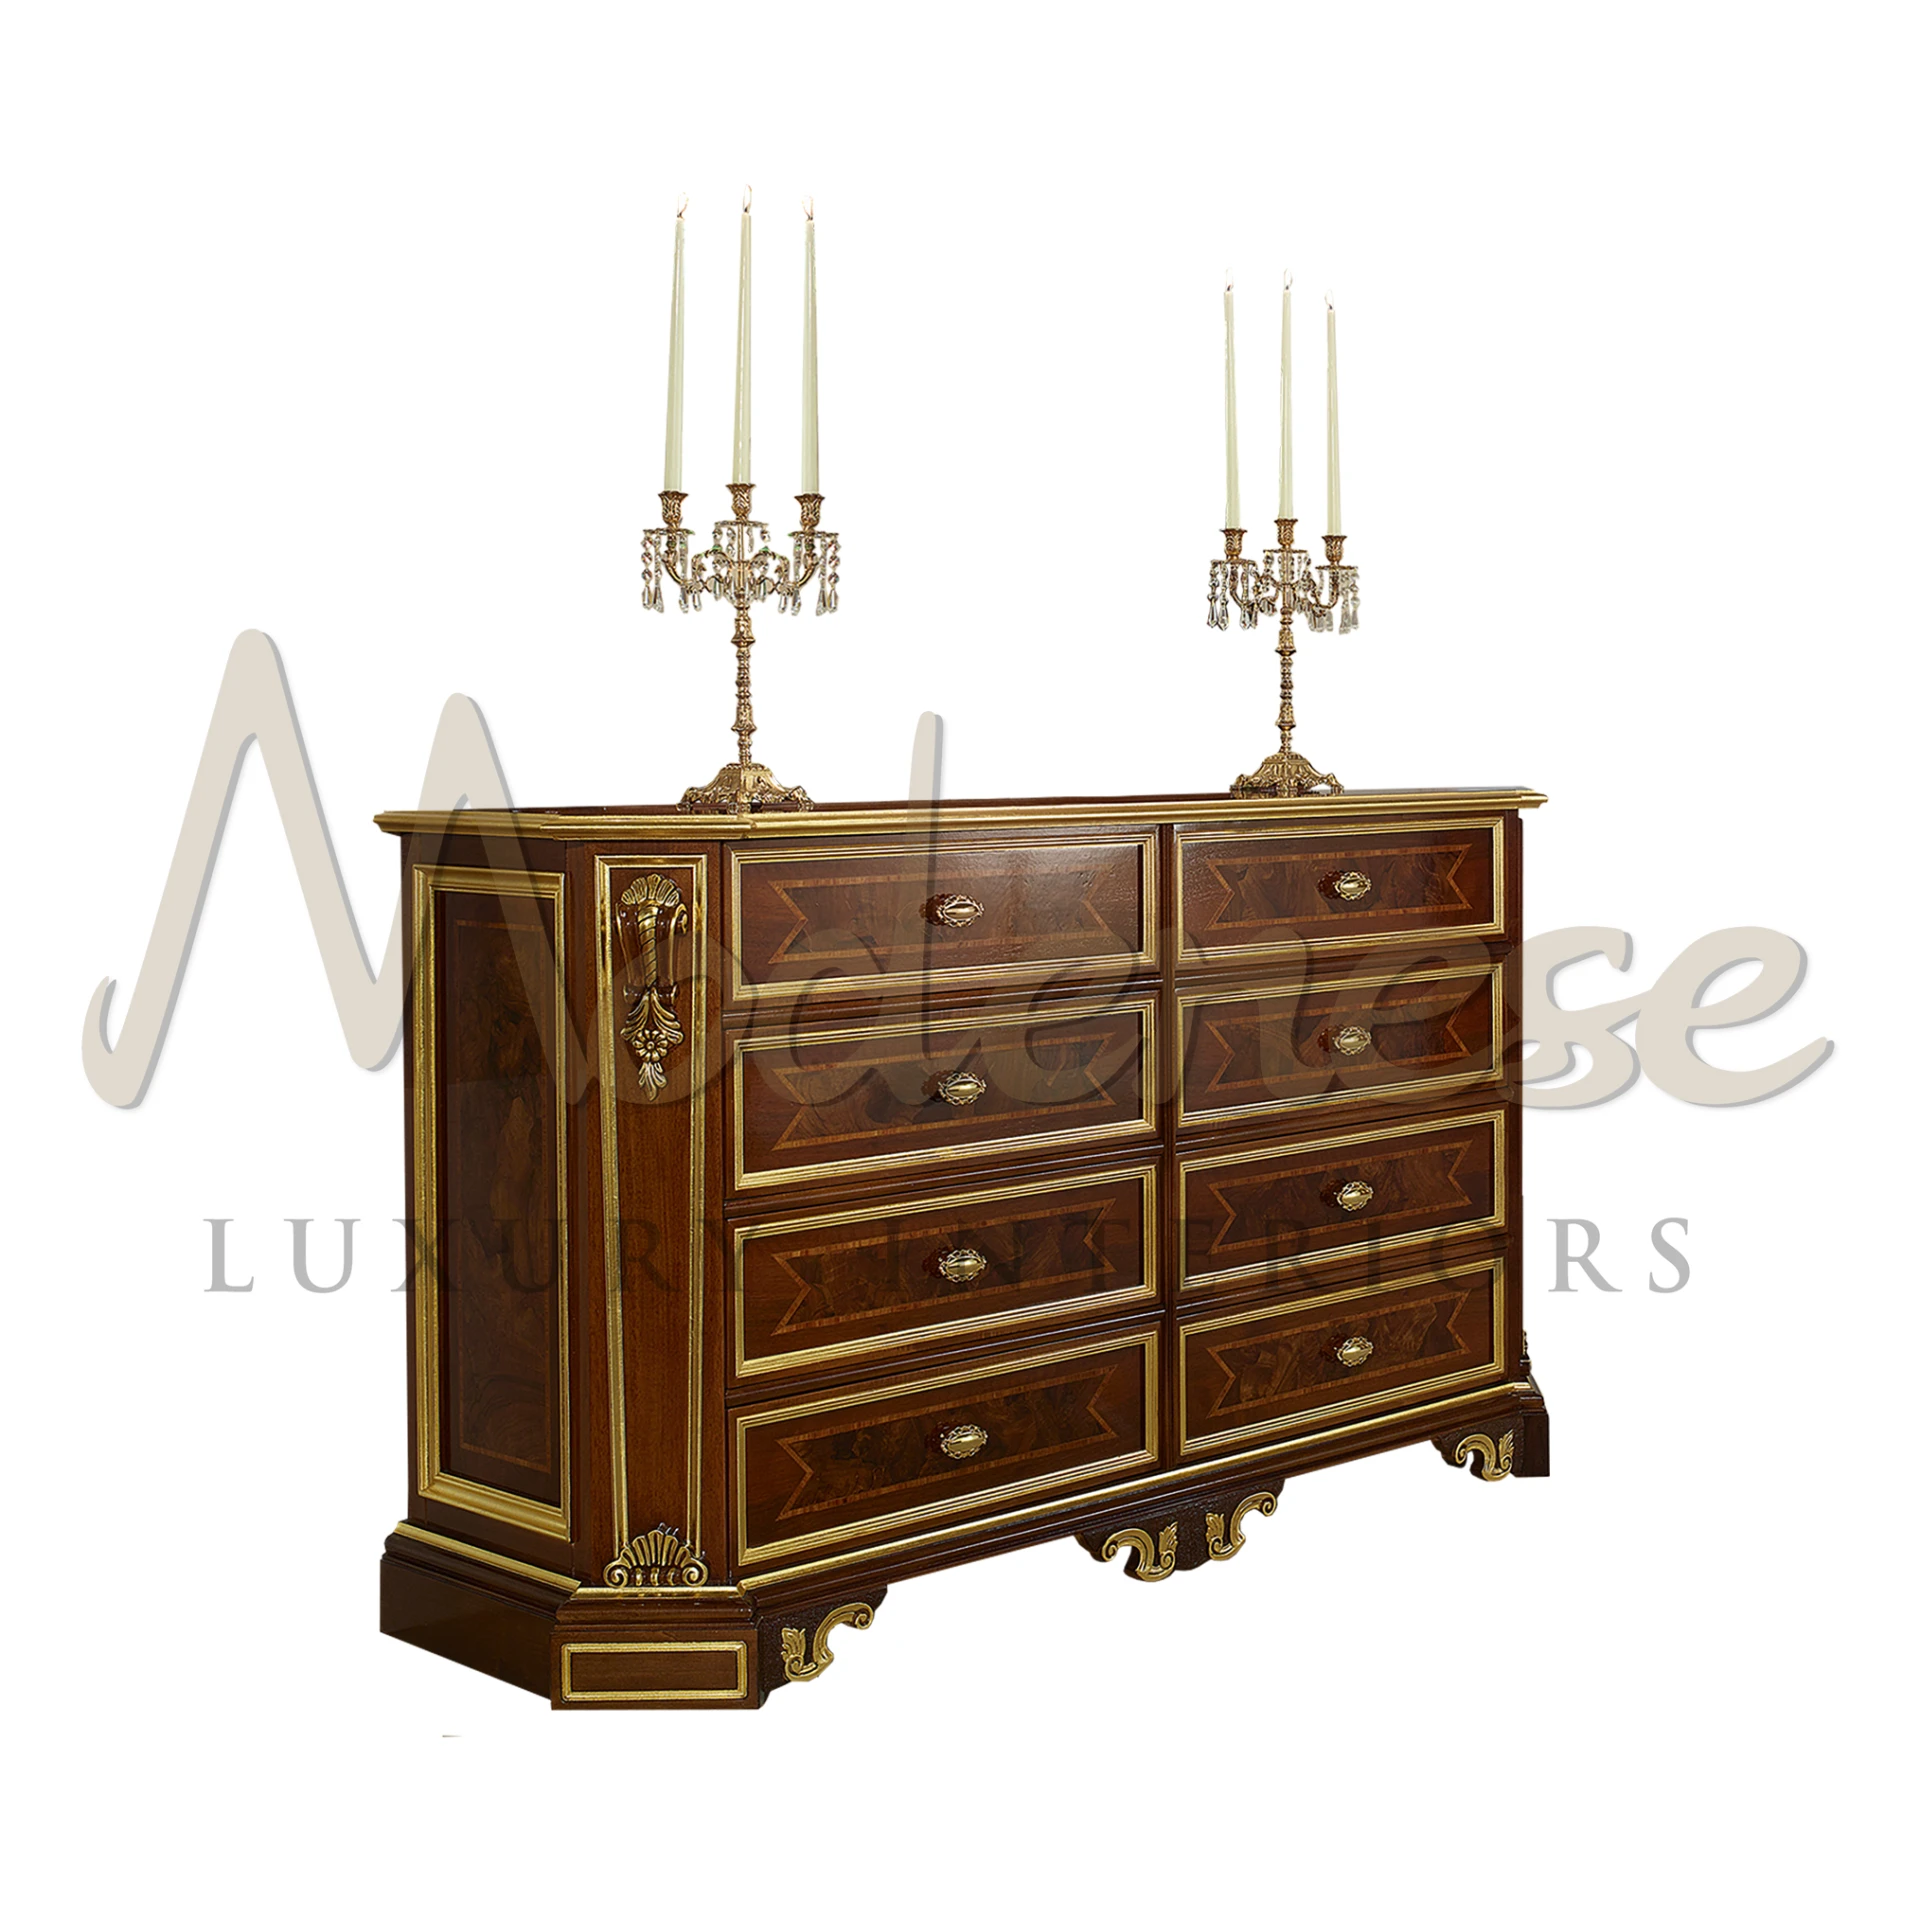 Traditional wood chest of drawers with brass handles and ornate candlestick holders on top.